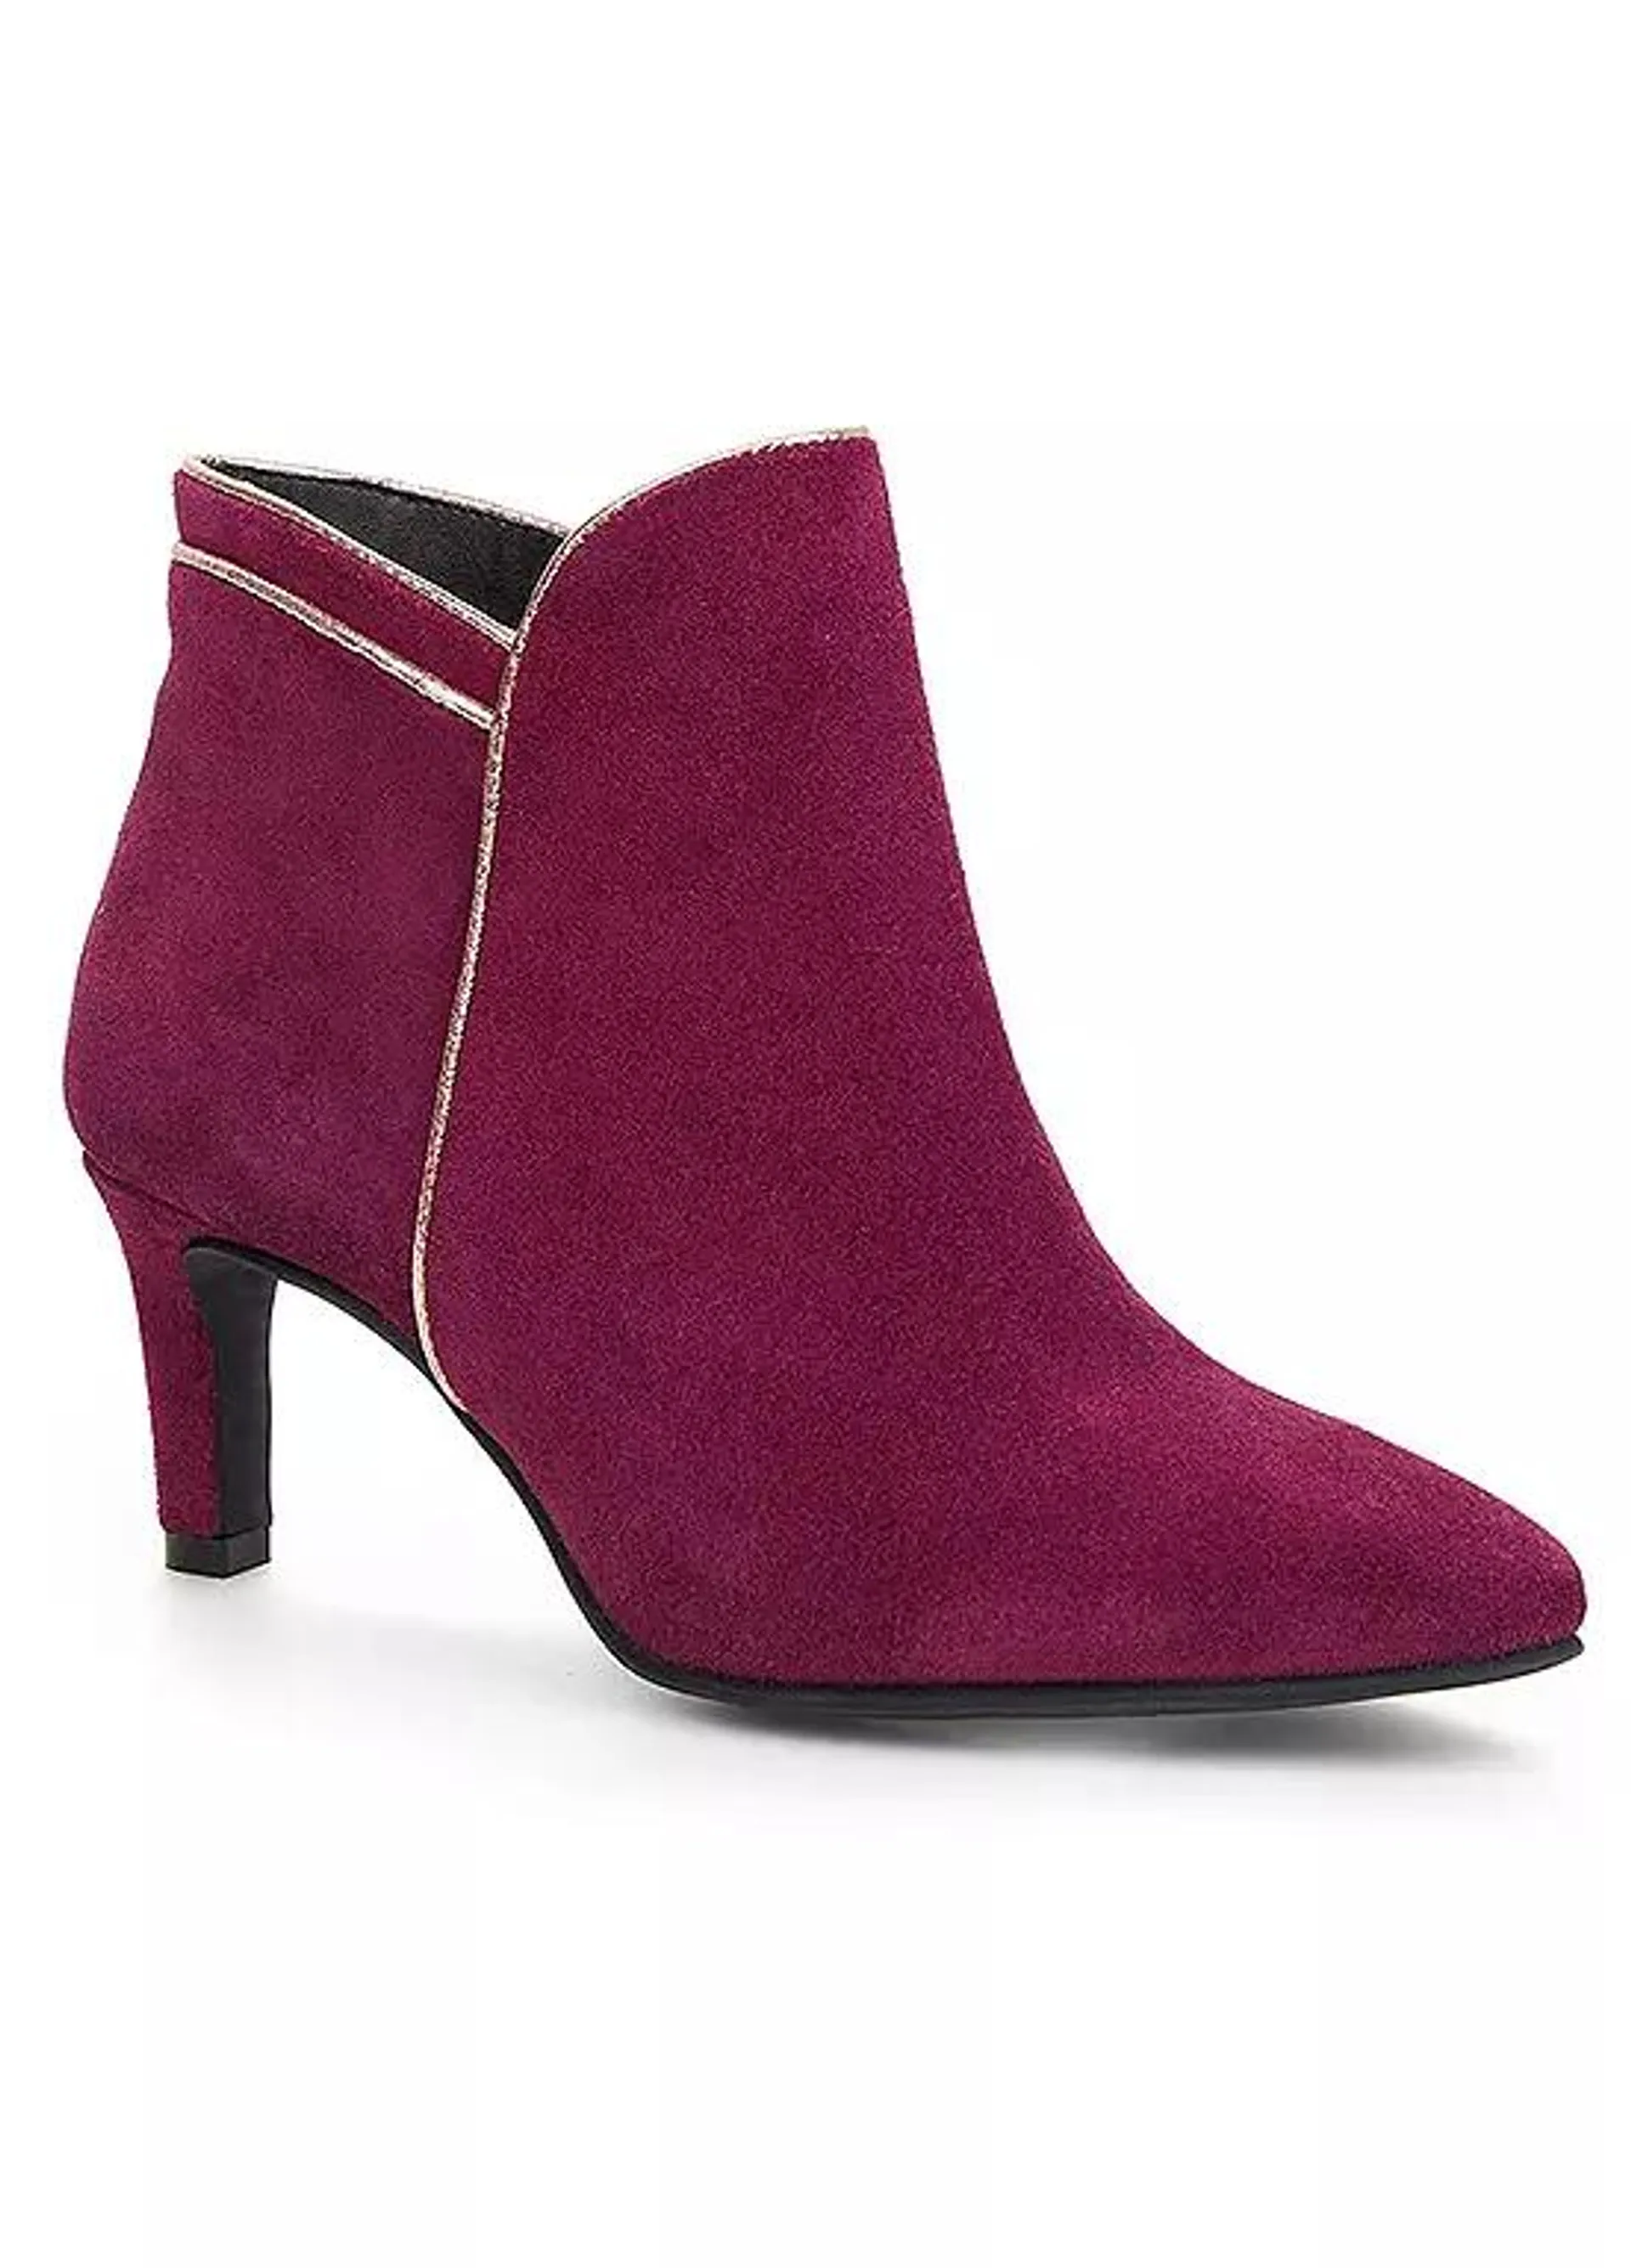 Kaleidoscope Burgundy Suede & Metallic Piping Ankle Boots